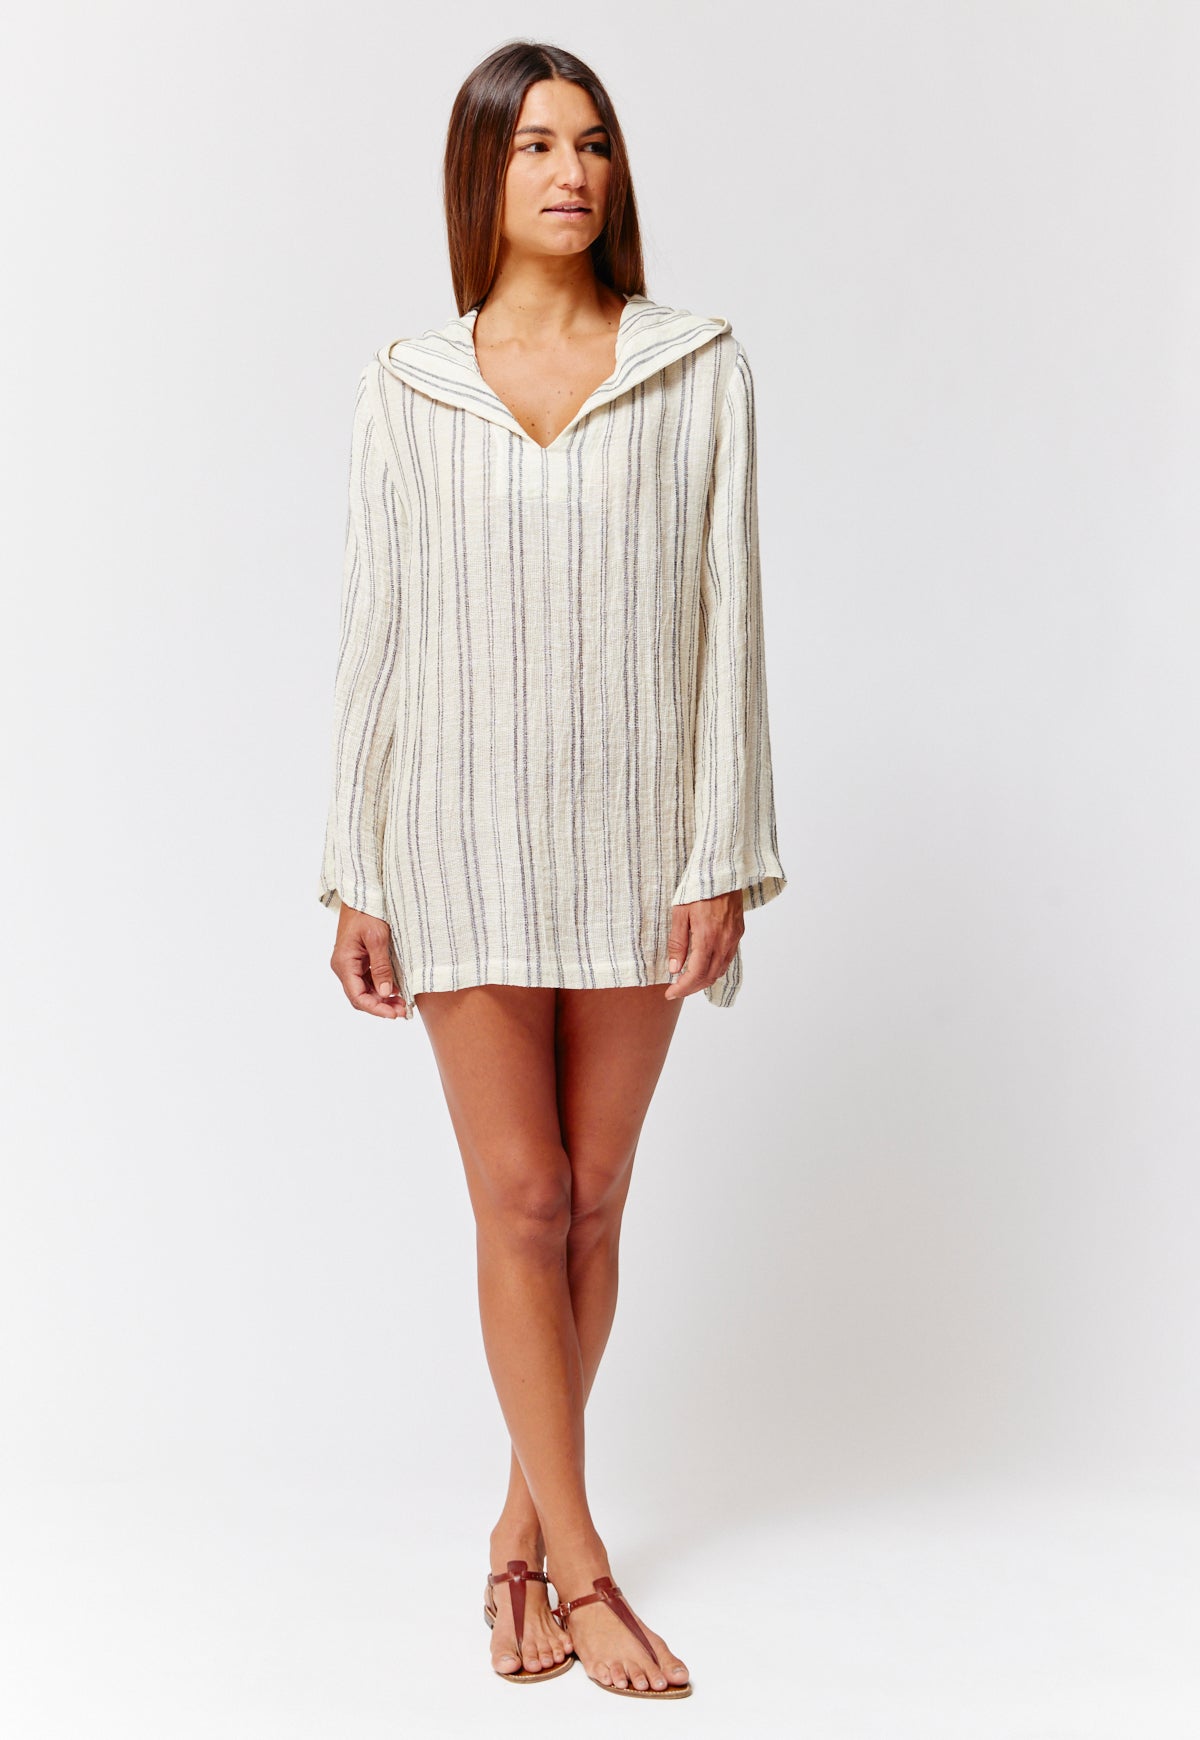 THE BEACH TUNIC in NATURAL & BLACK STRIPED CHIOS GAUZE